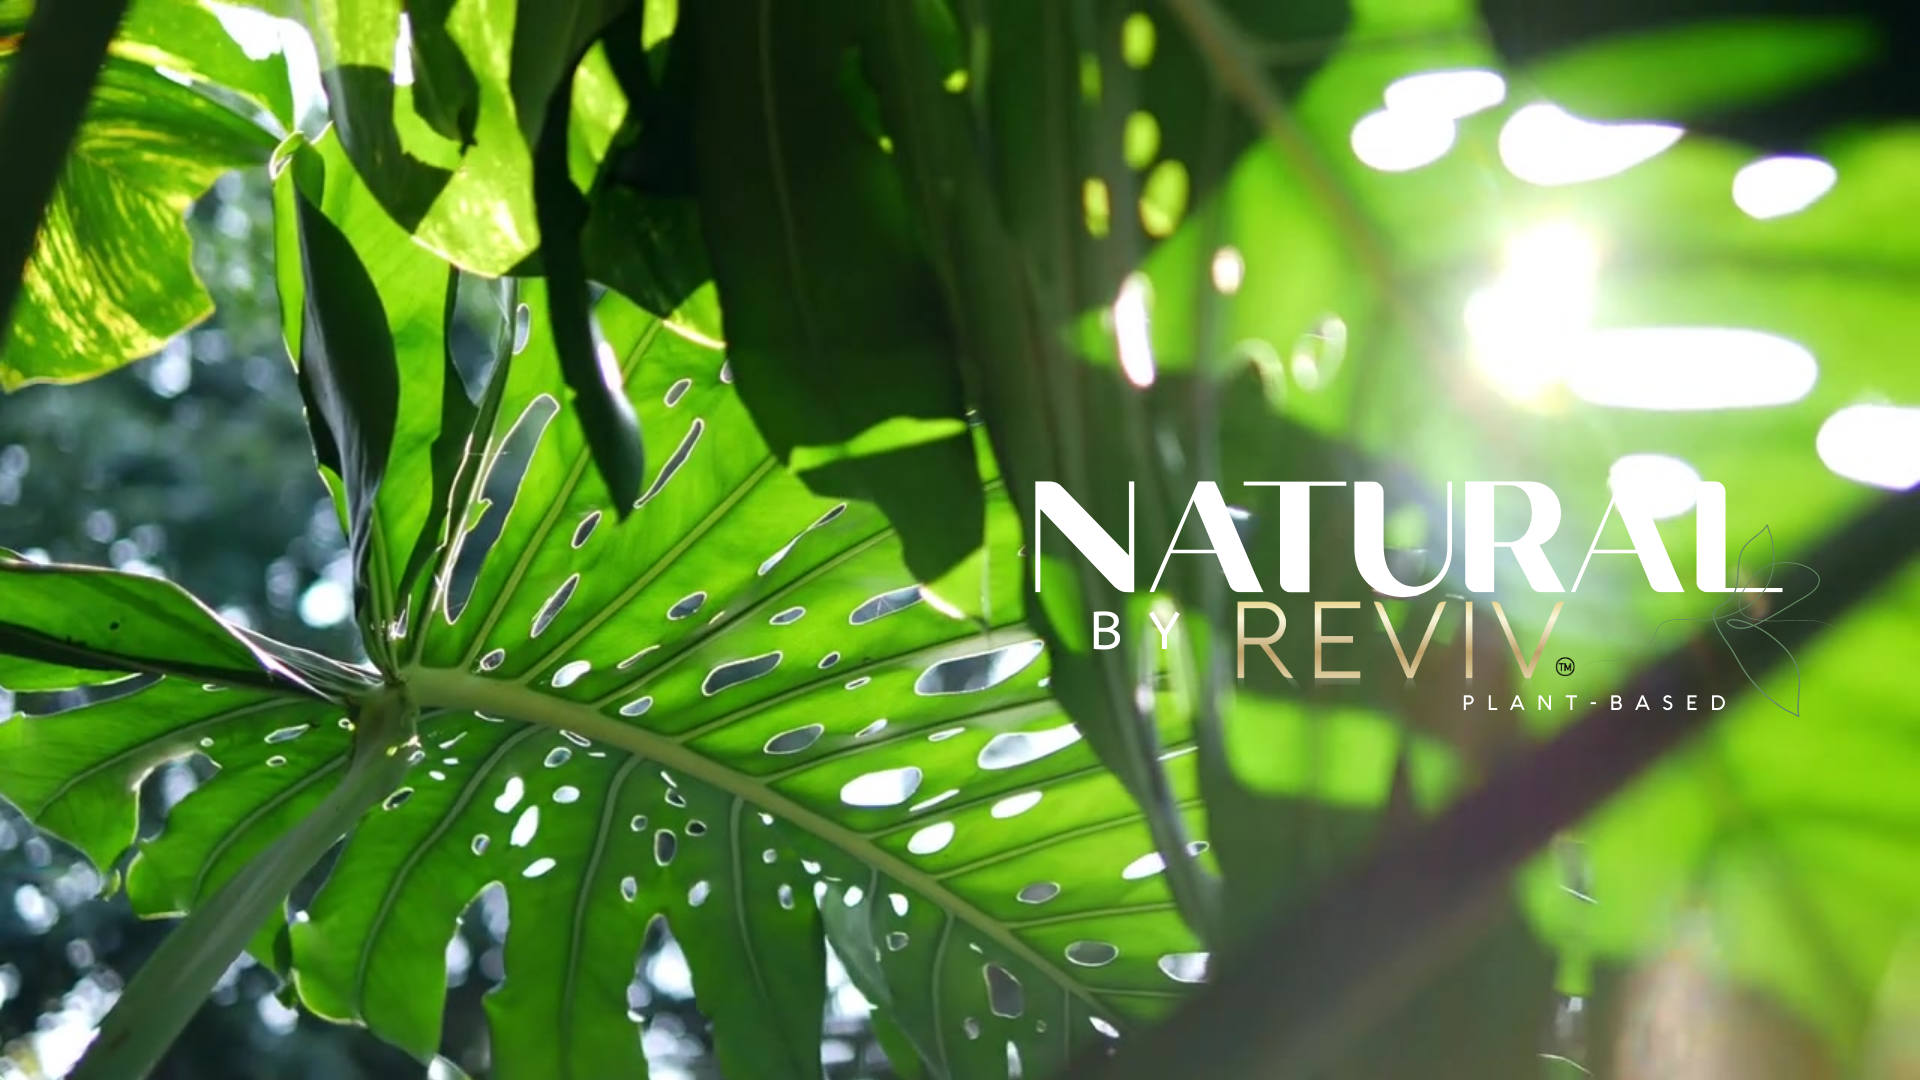 Load video: Natural by REVIV